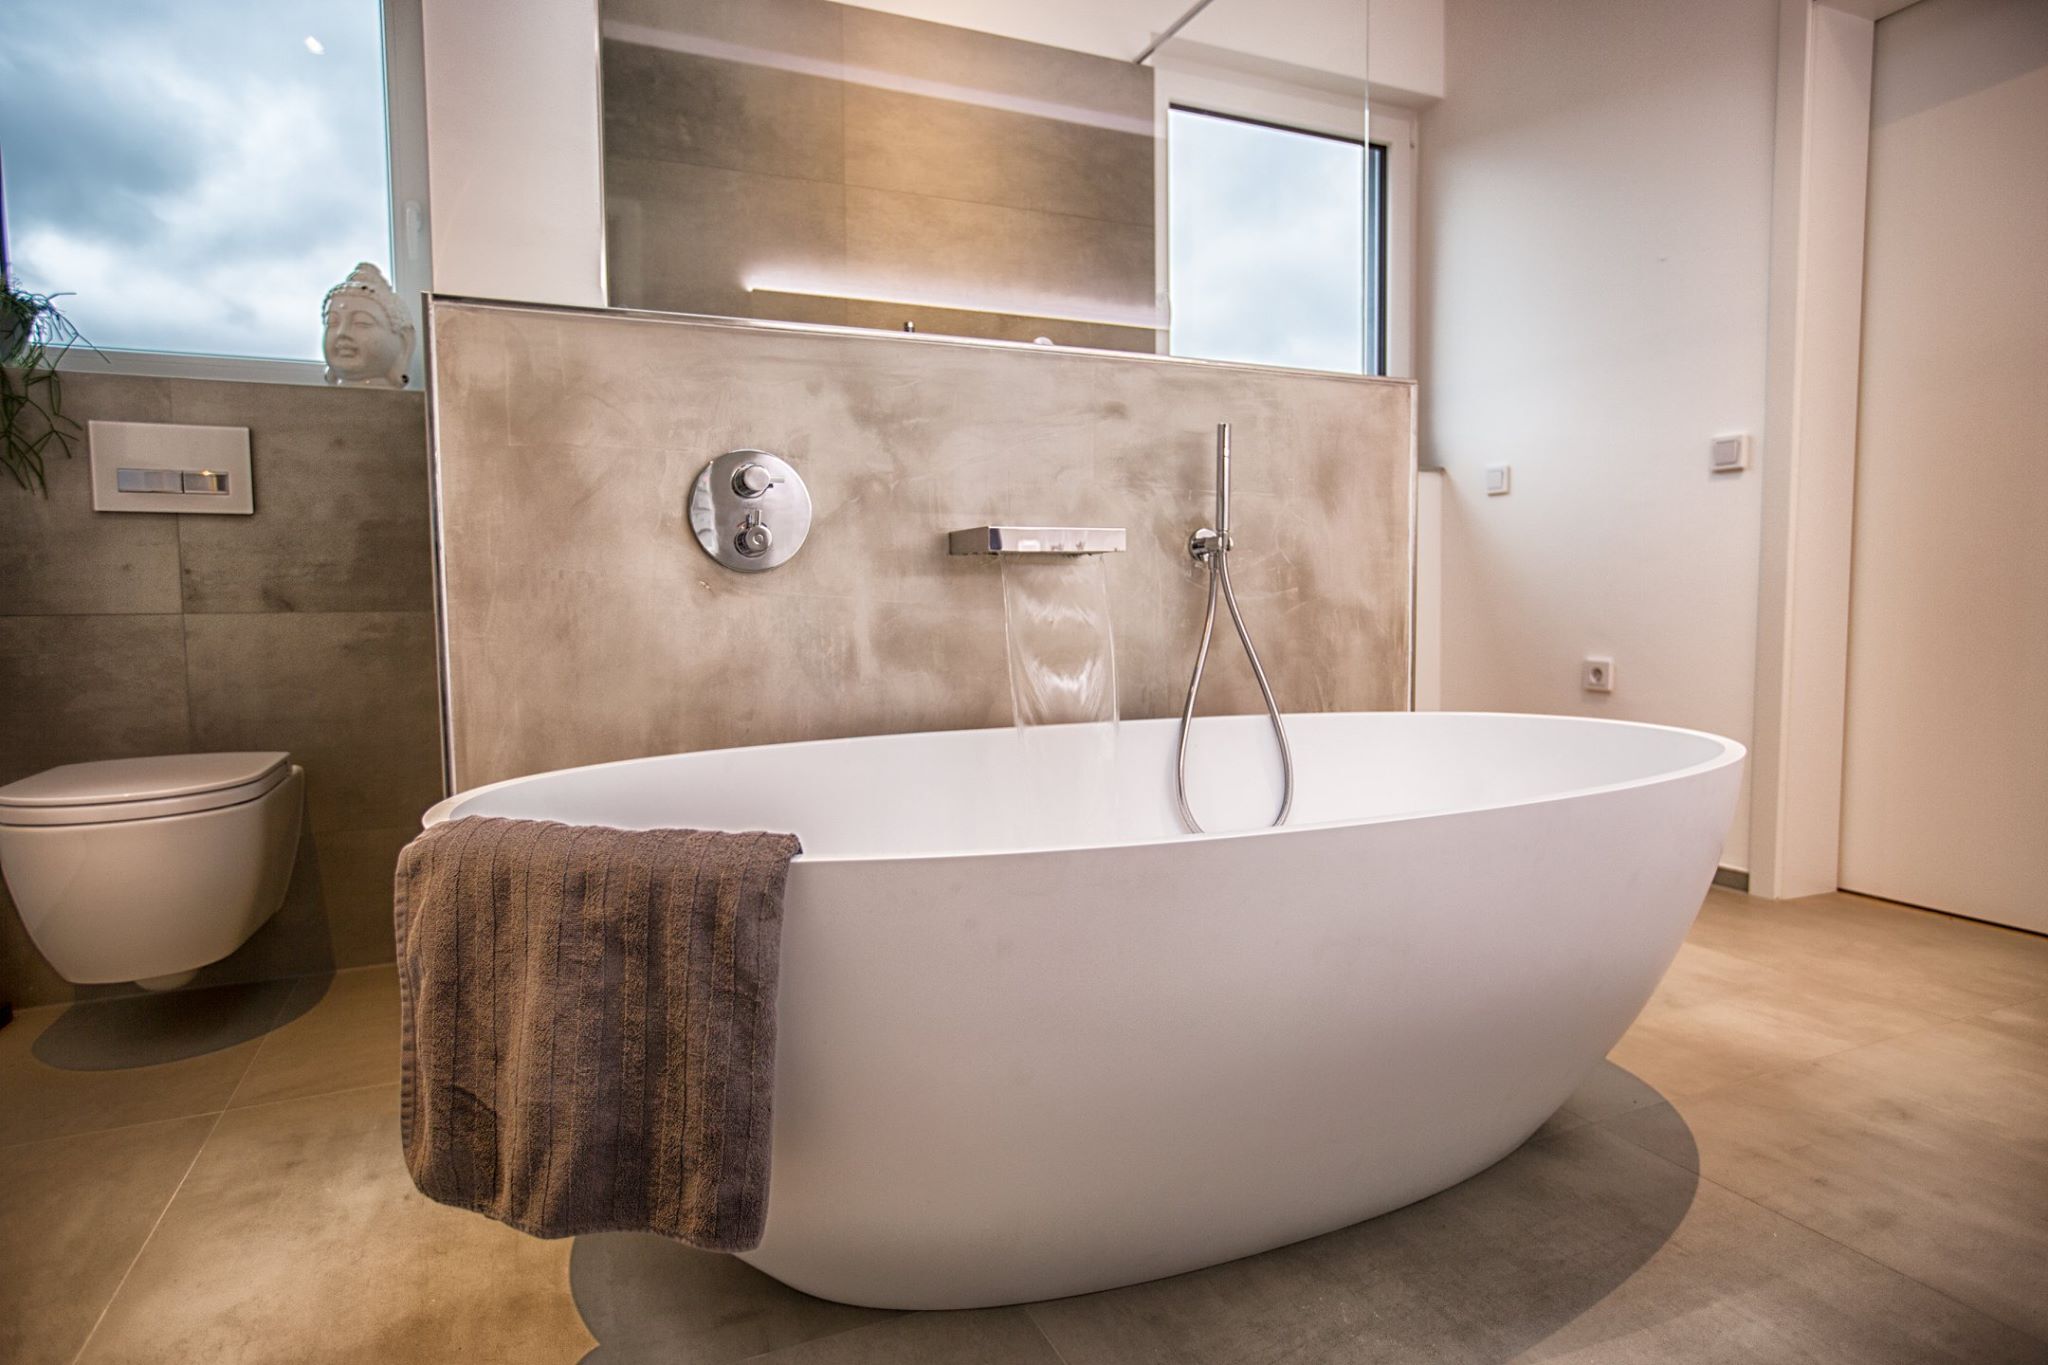 How To Choose The Right Bathtub For You?